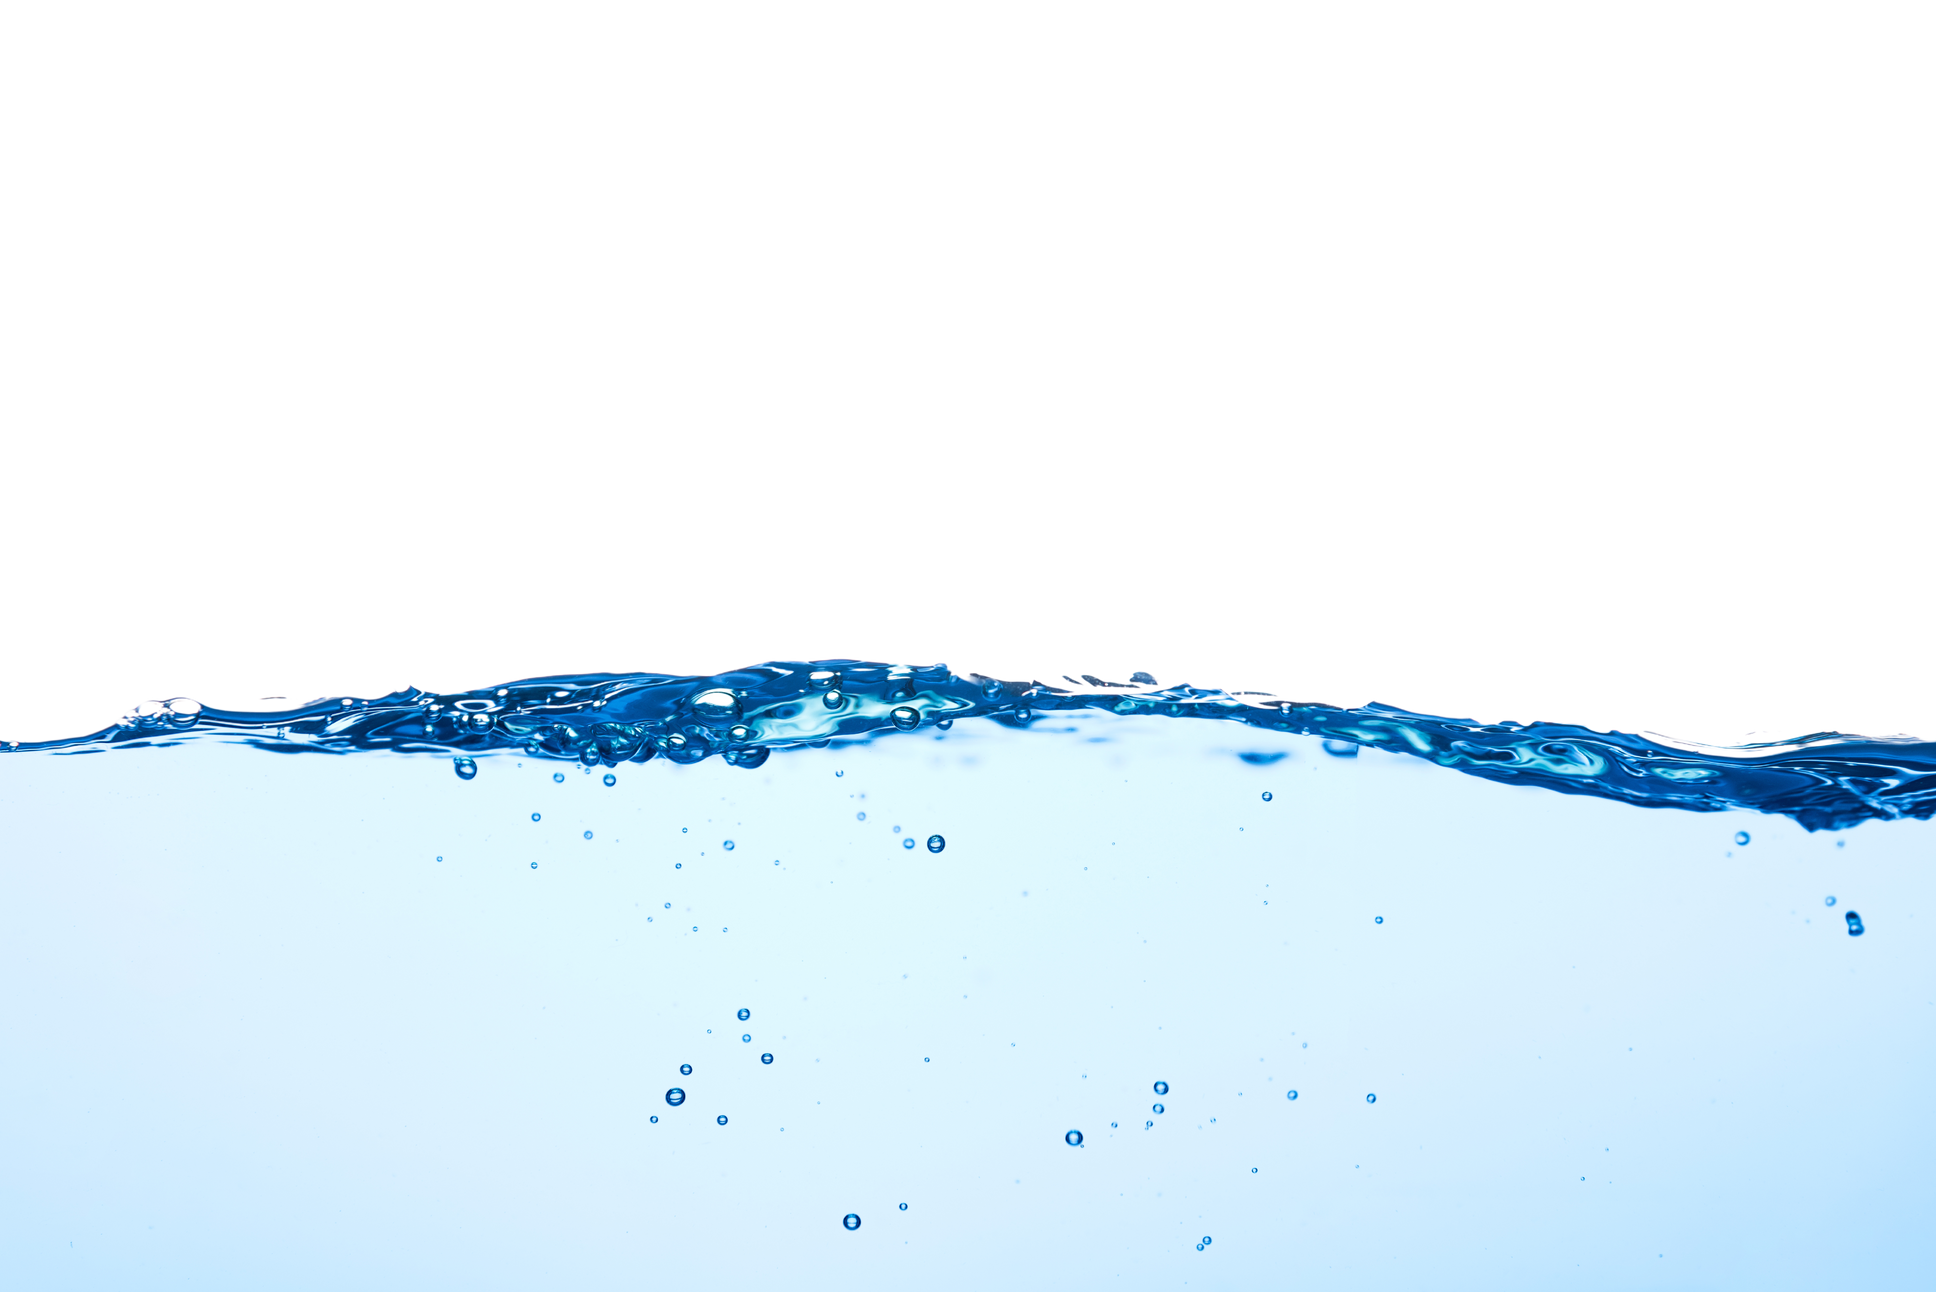 Light Blue Water Wave with Air Bubbles and a Little Bit Splashed